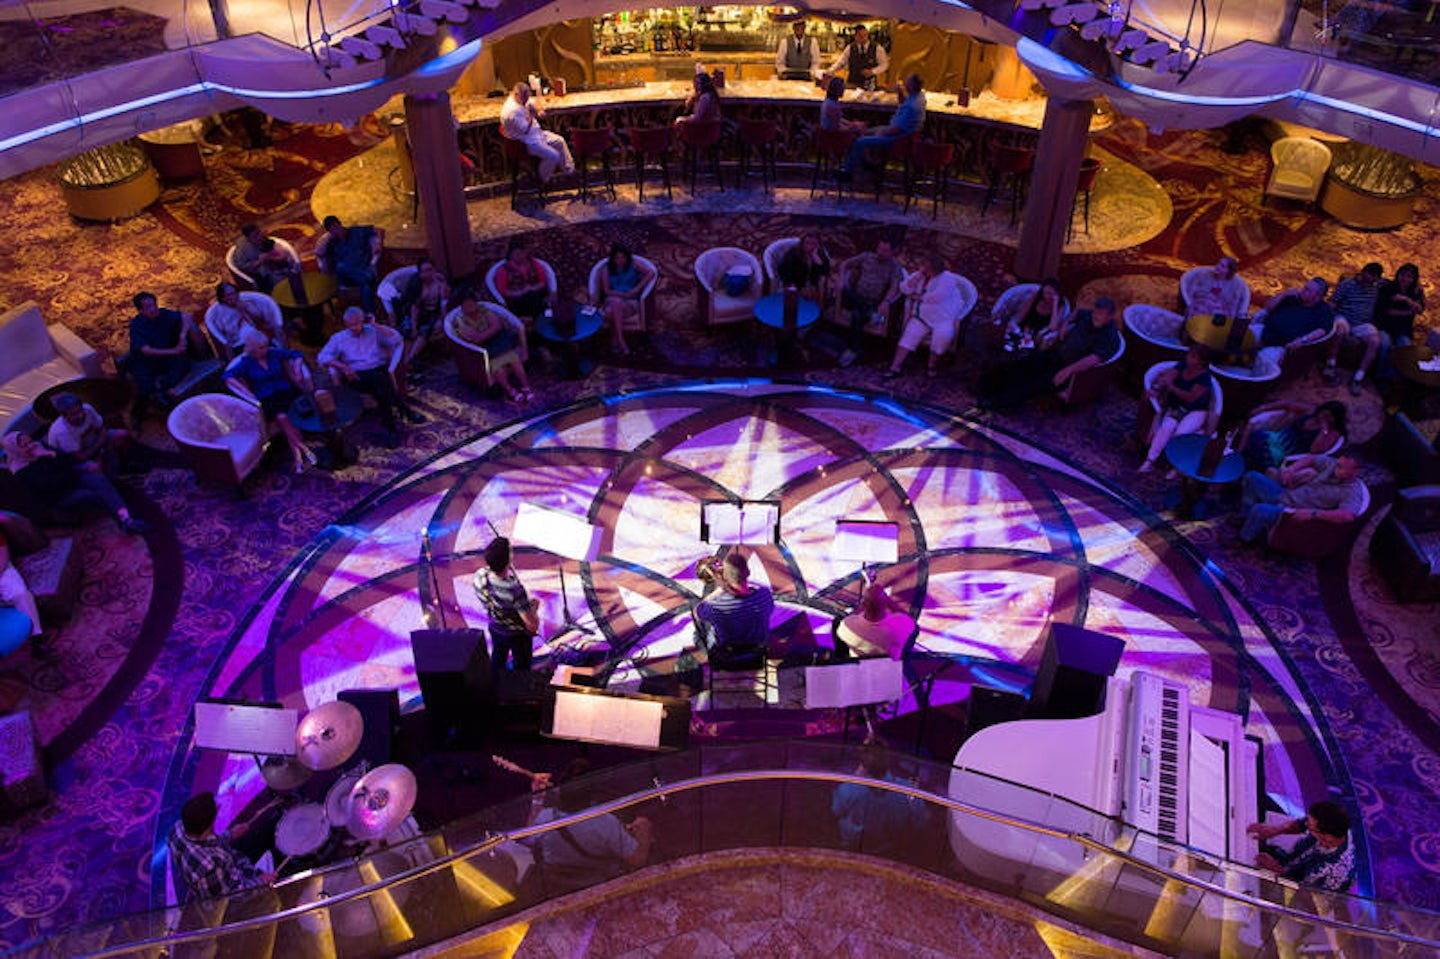 Enchanted of the Seas Orchestra on Enchantment of the Seas